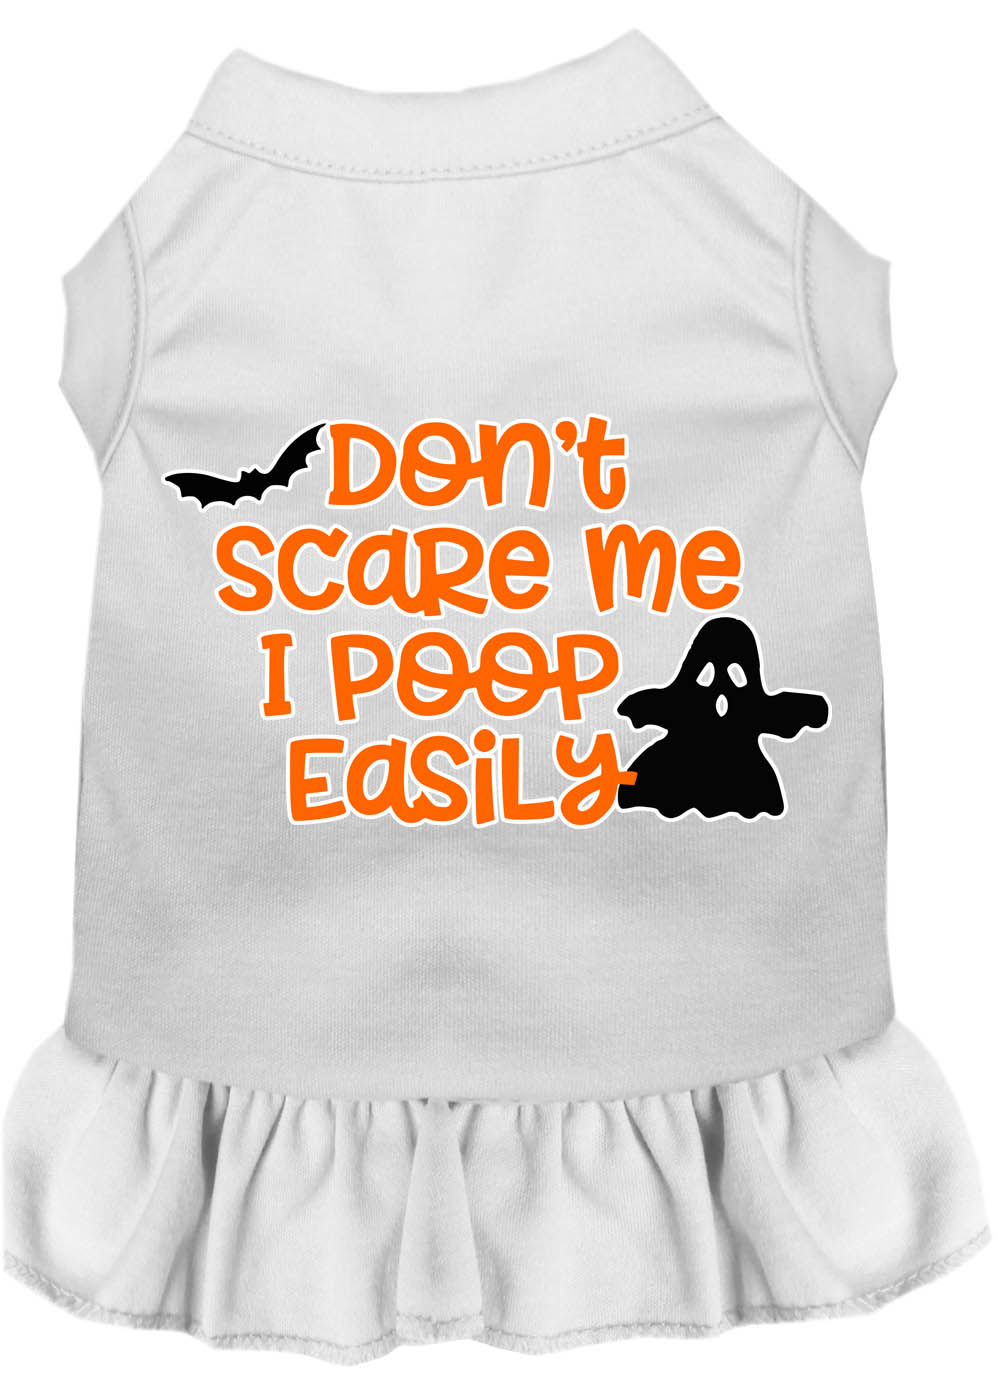 Don't Scare Me, Poops Easily Screen Print Dog Dress White Sm